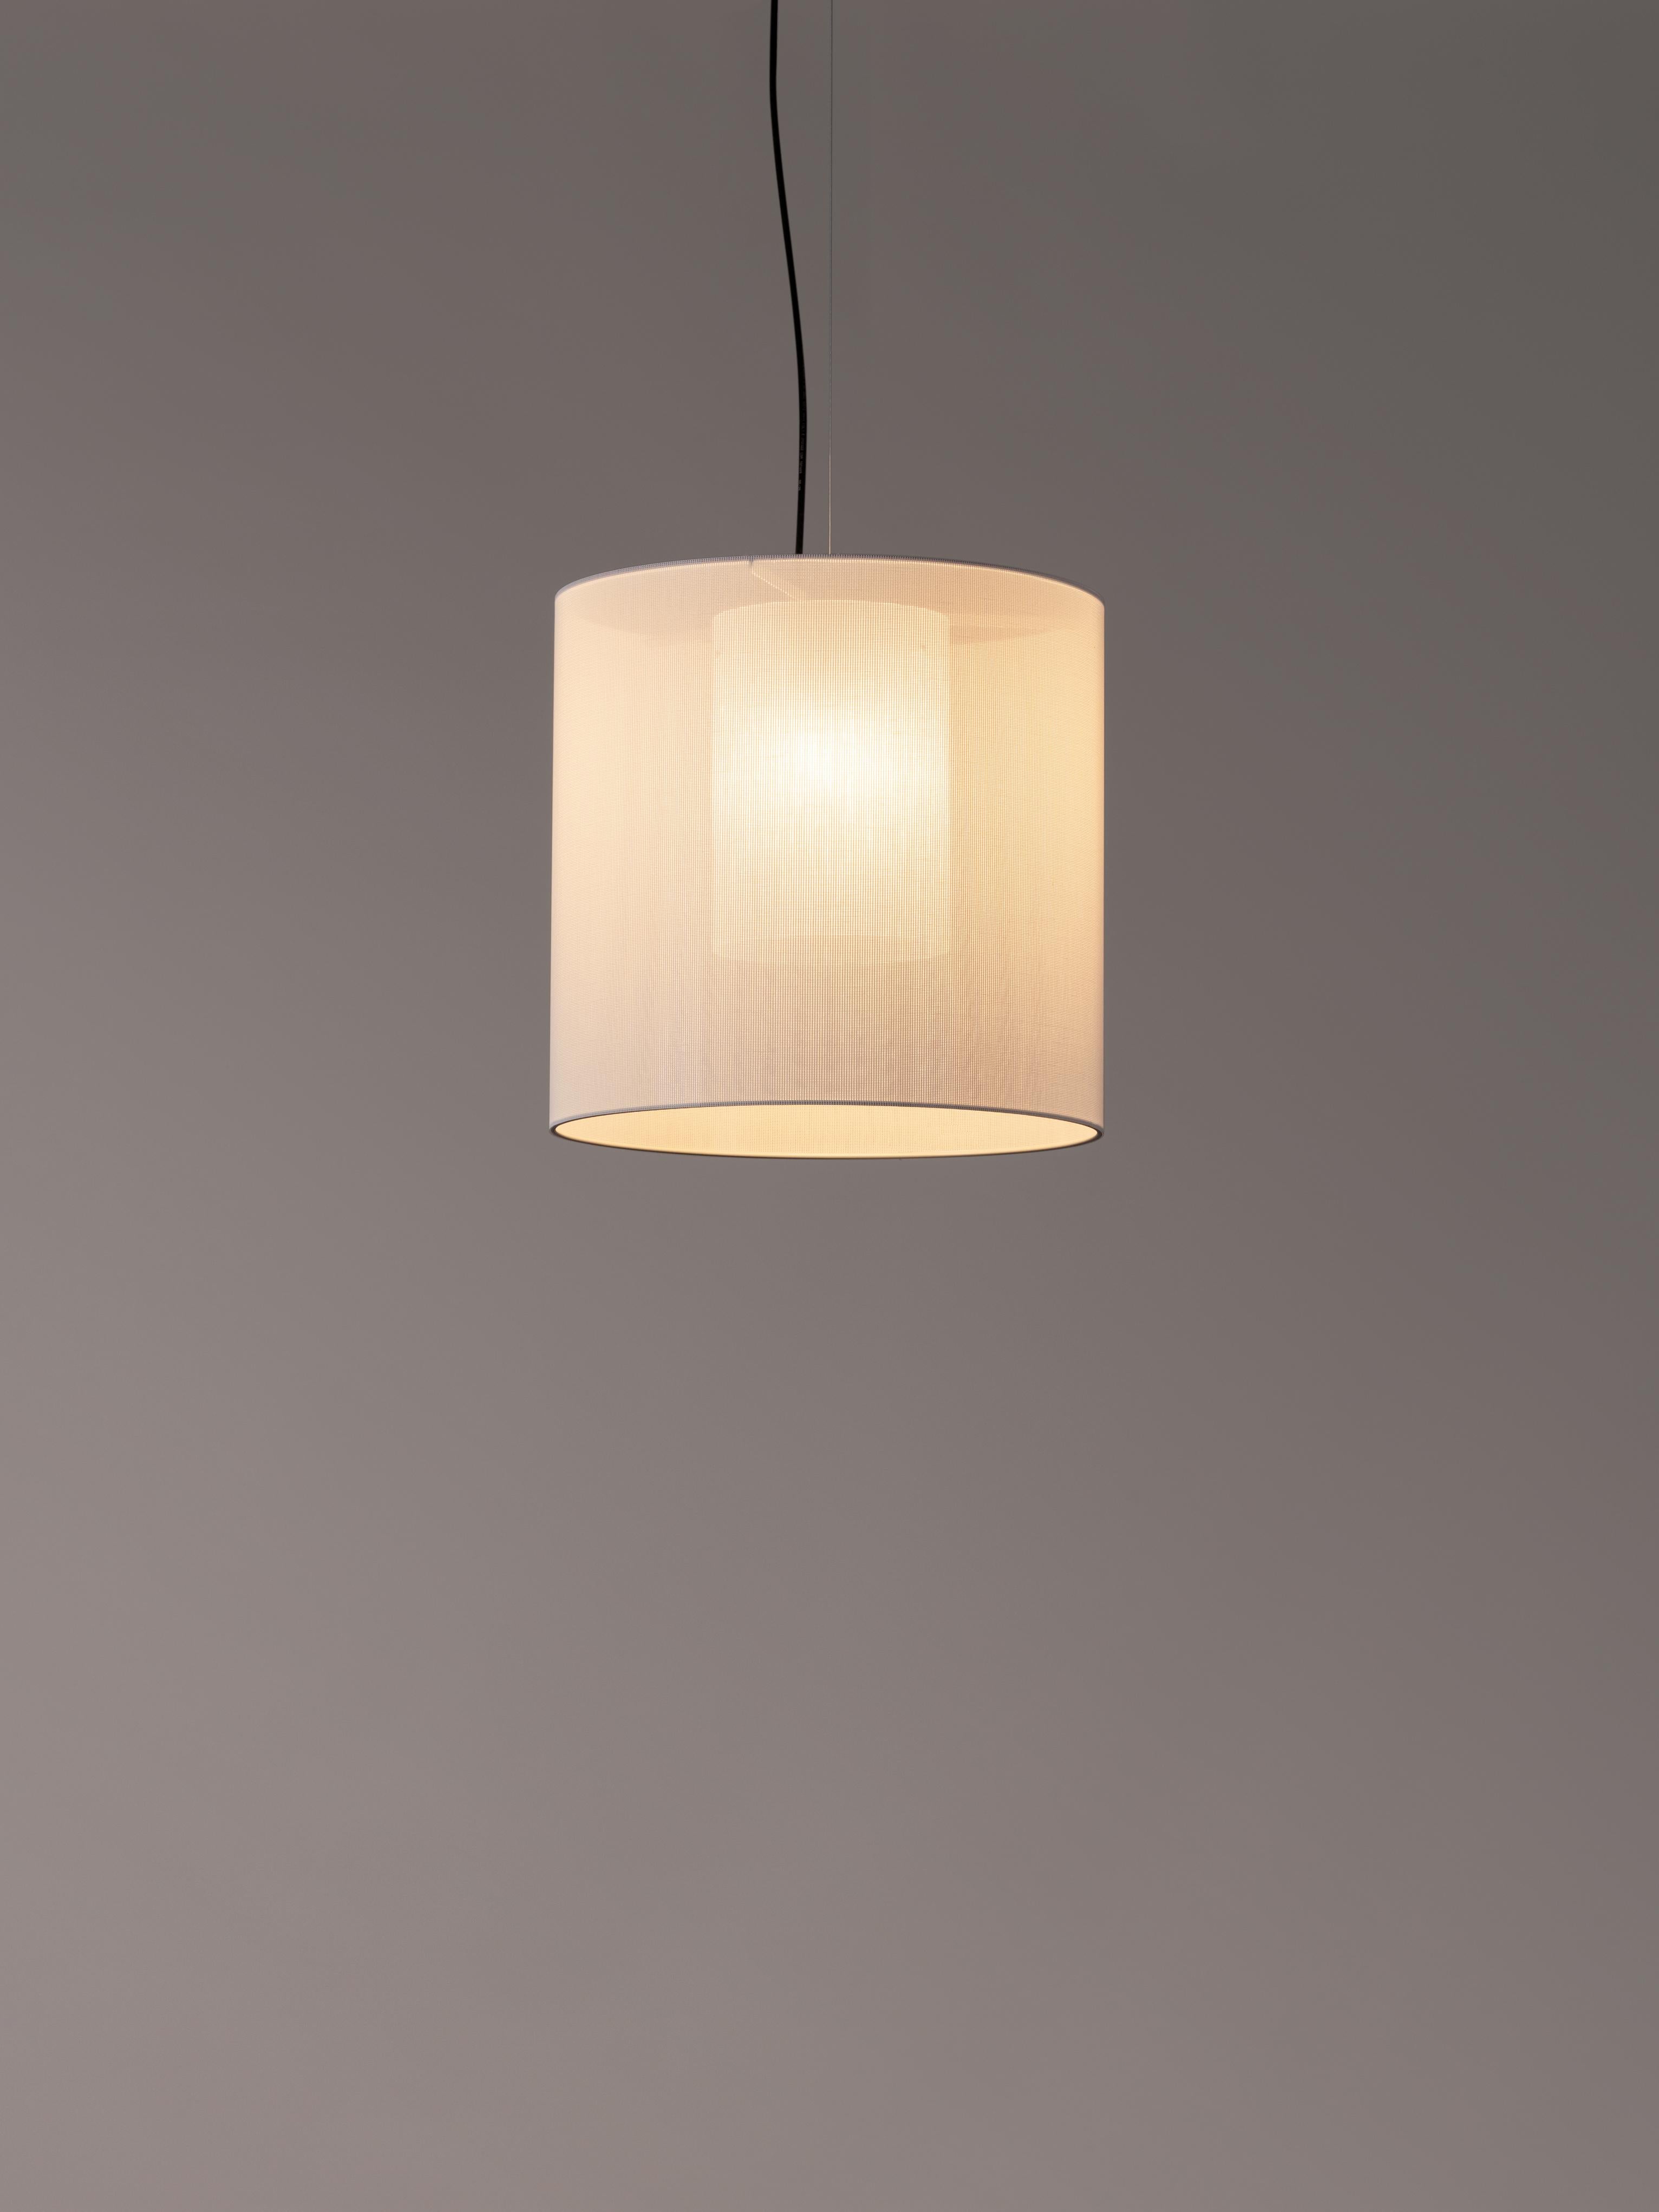 White moaré M pendant lamp by Antoni Arola
Dimensions: D 46 x H 45 cm
Materials: Metal, polyester.
Available in other colors and sizes.

Moaré’s multiple combinations of formats and colours make it highly versatile. The series takes its name